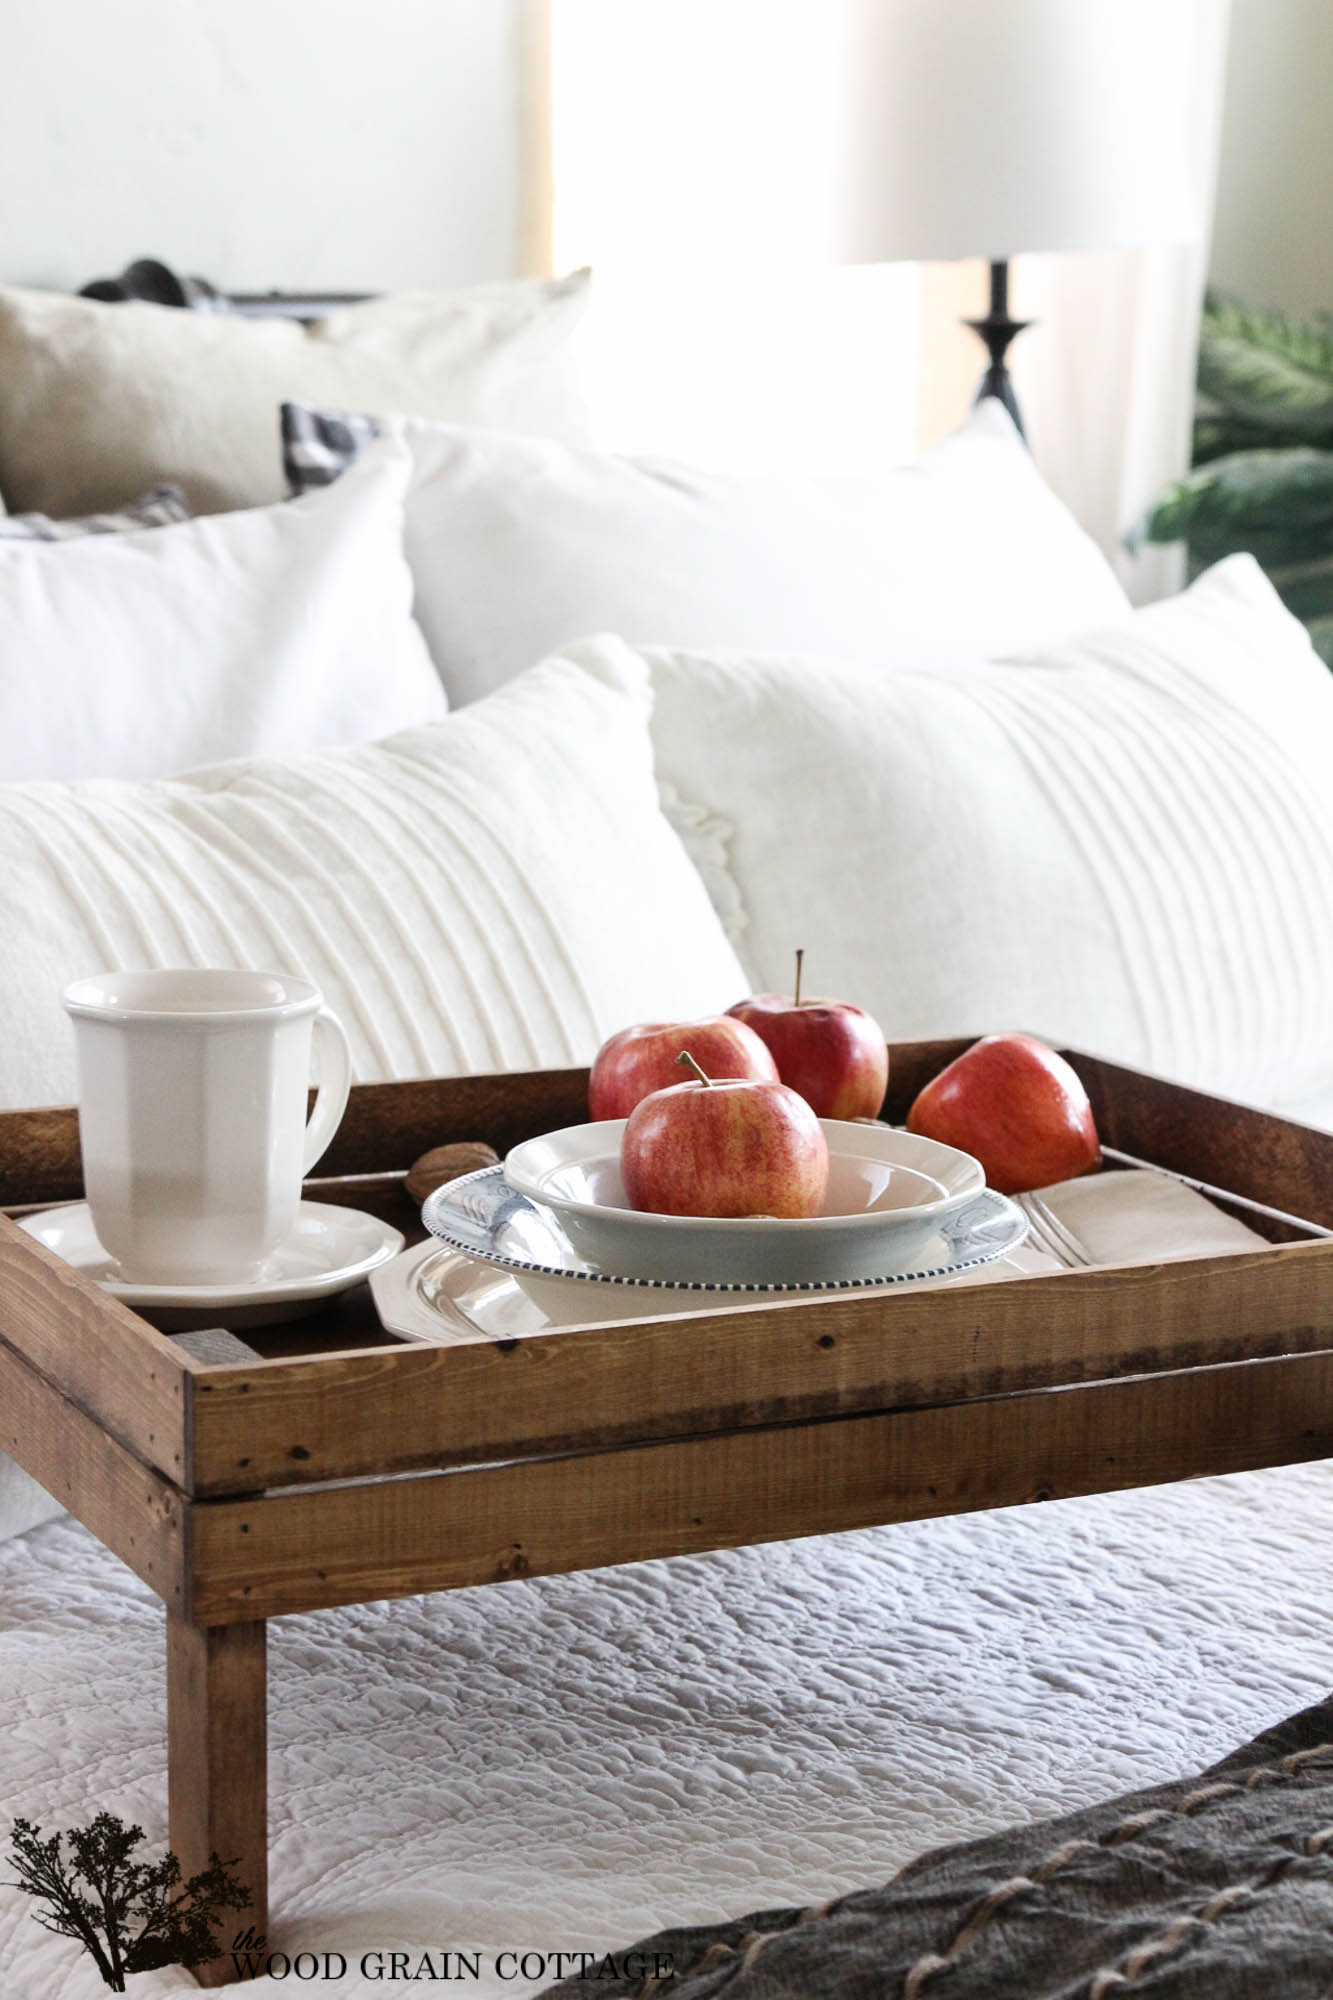 A Footed Tray Is Good For More Than Just Breakfast in Bed